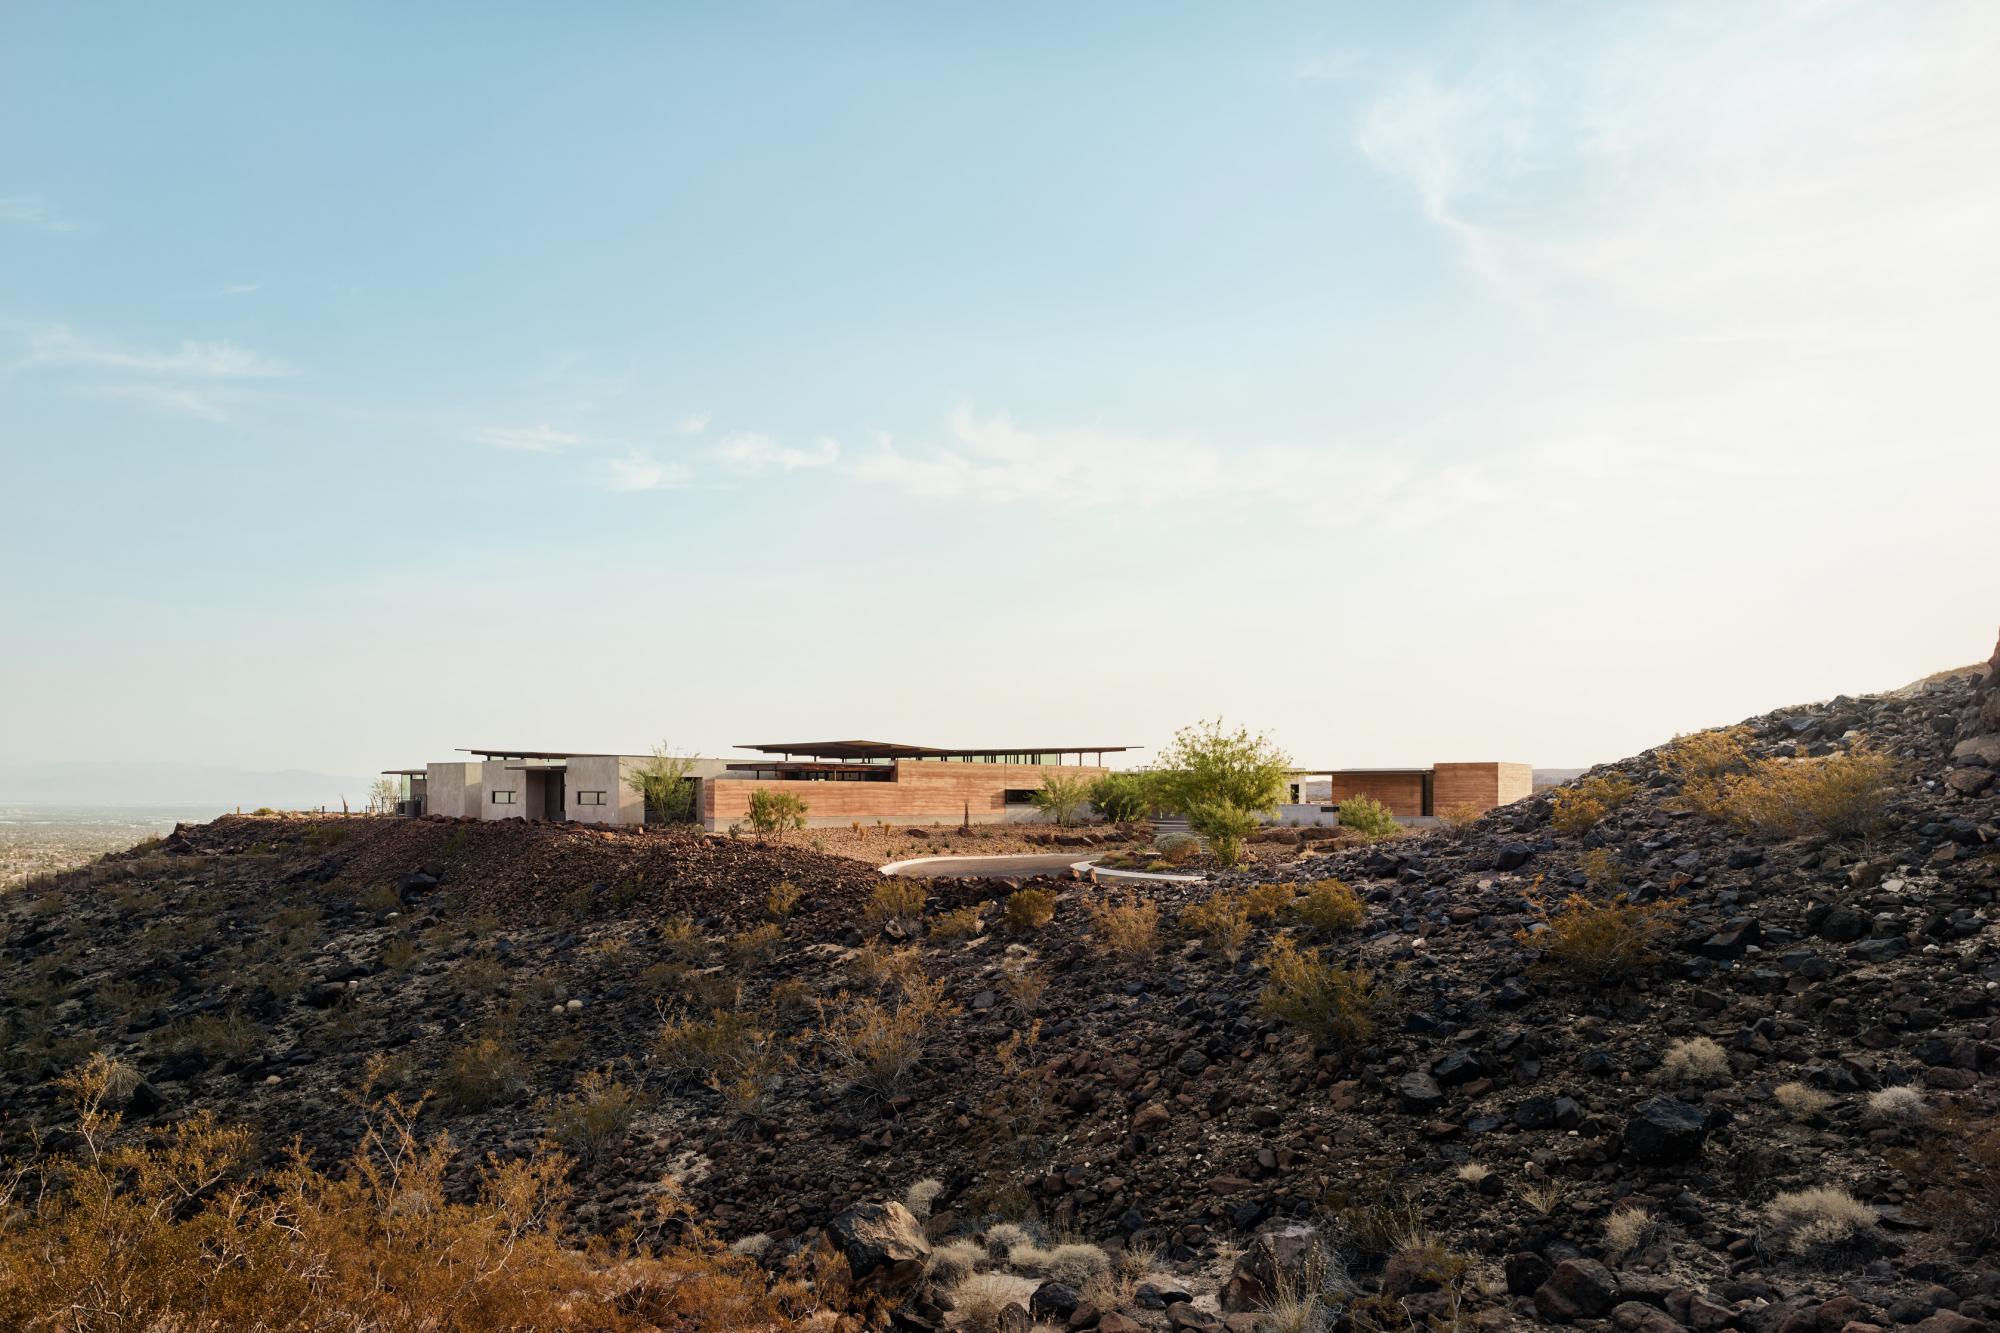 Horizon House uses rammed earth as the primary material which is designed to reflect the surrounding natural topography